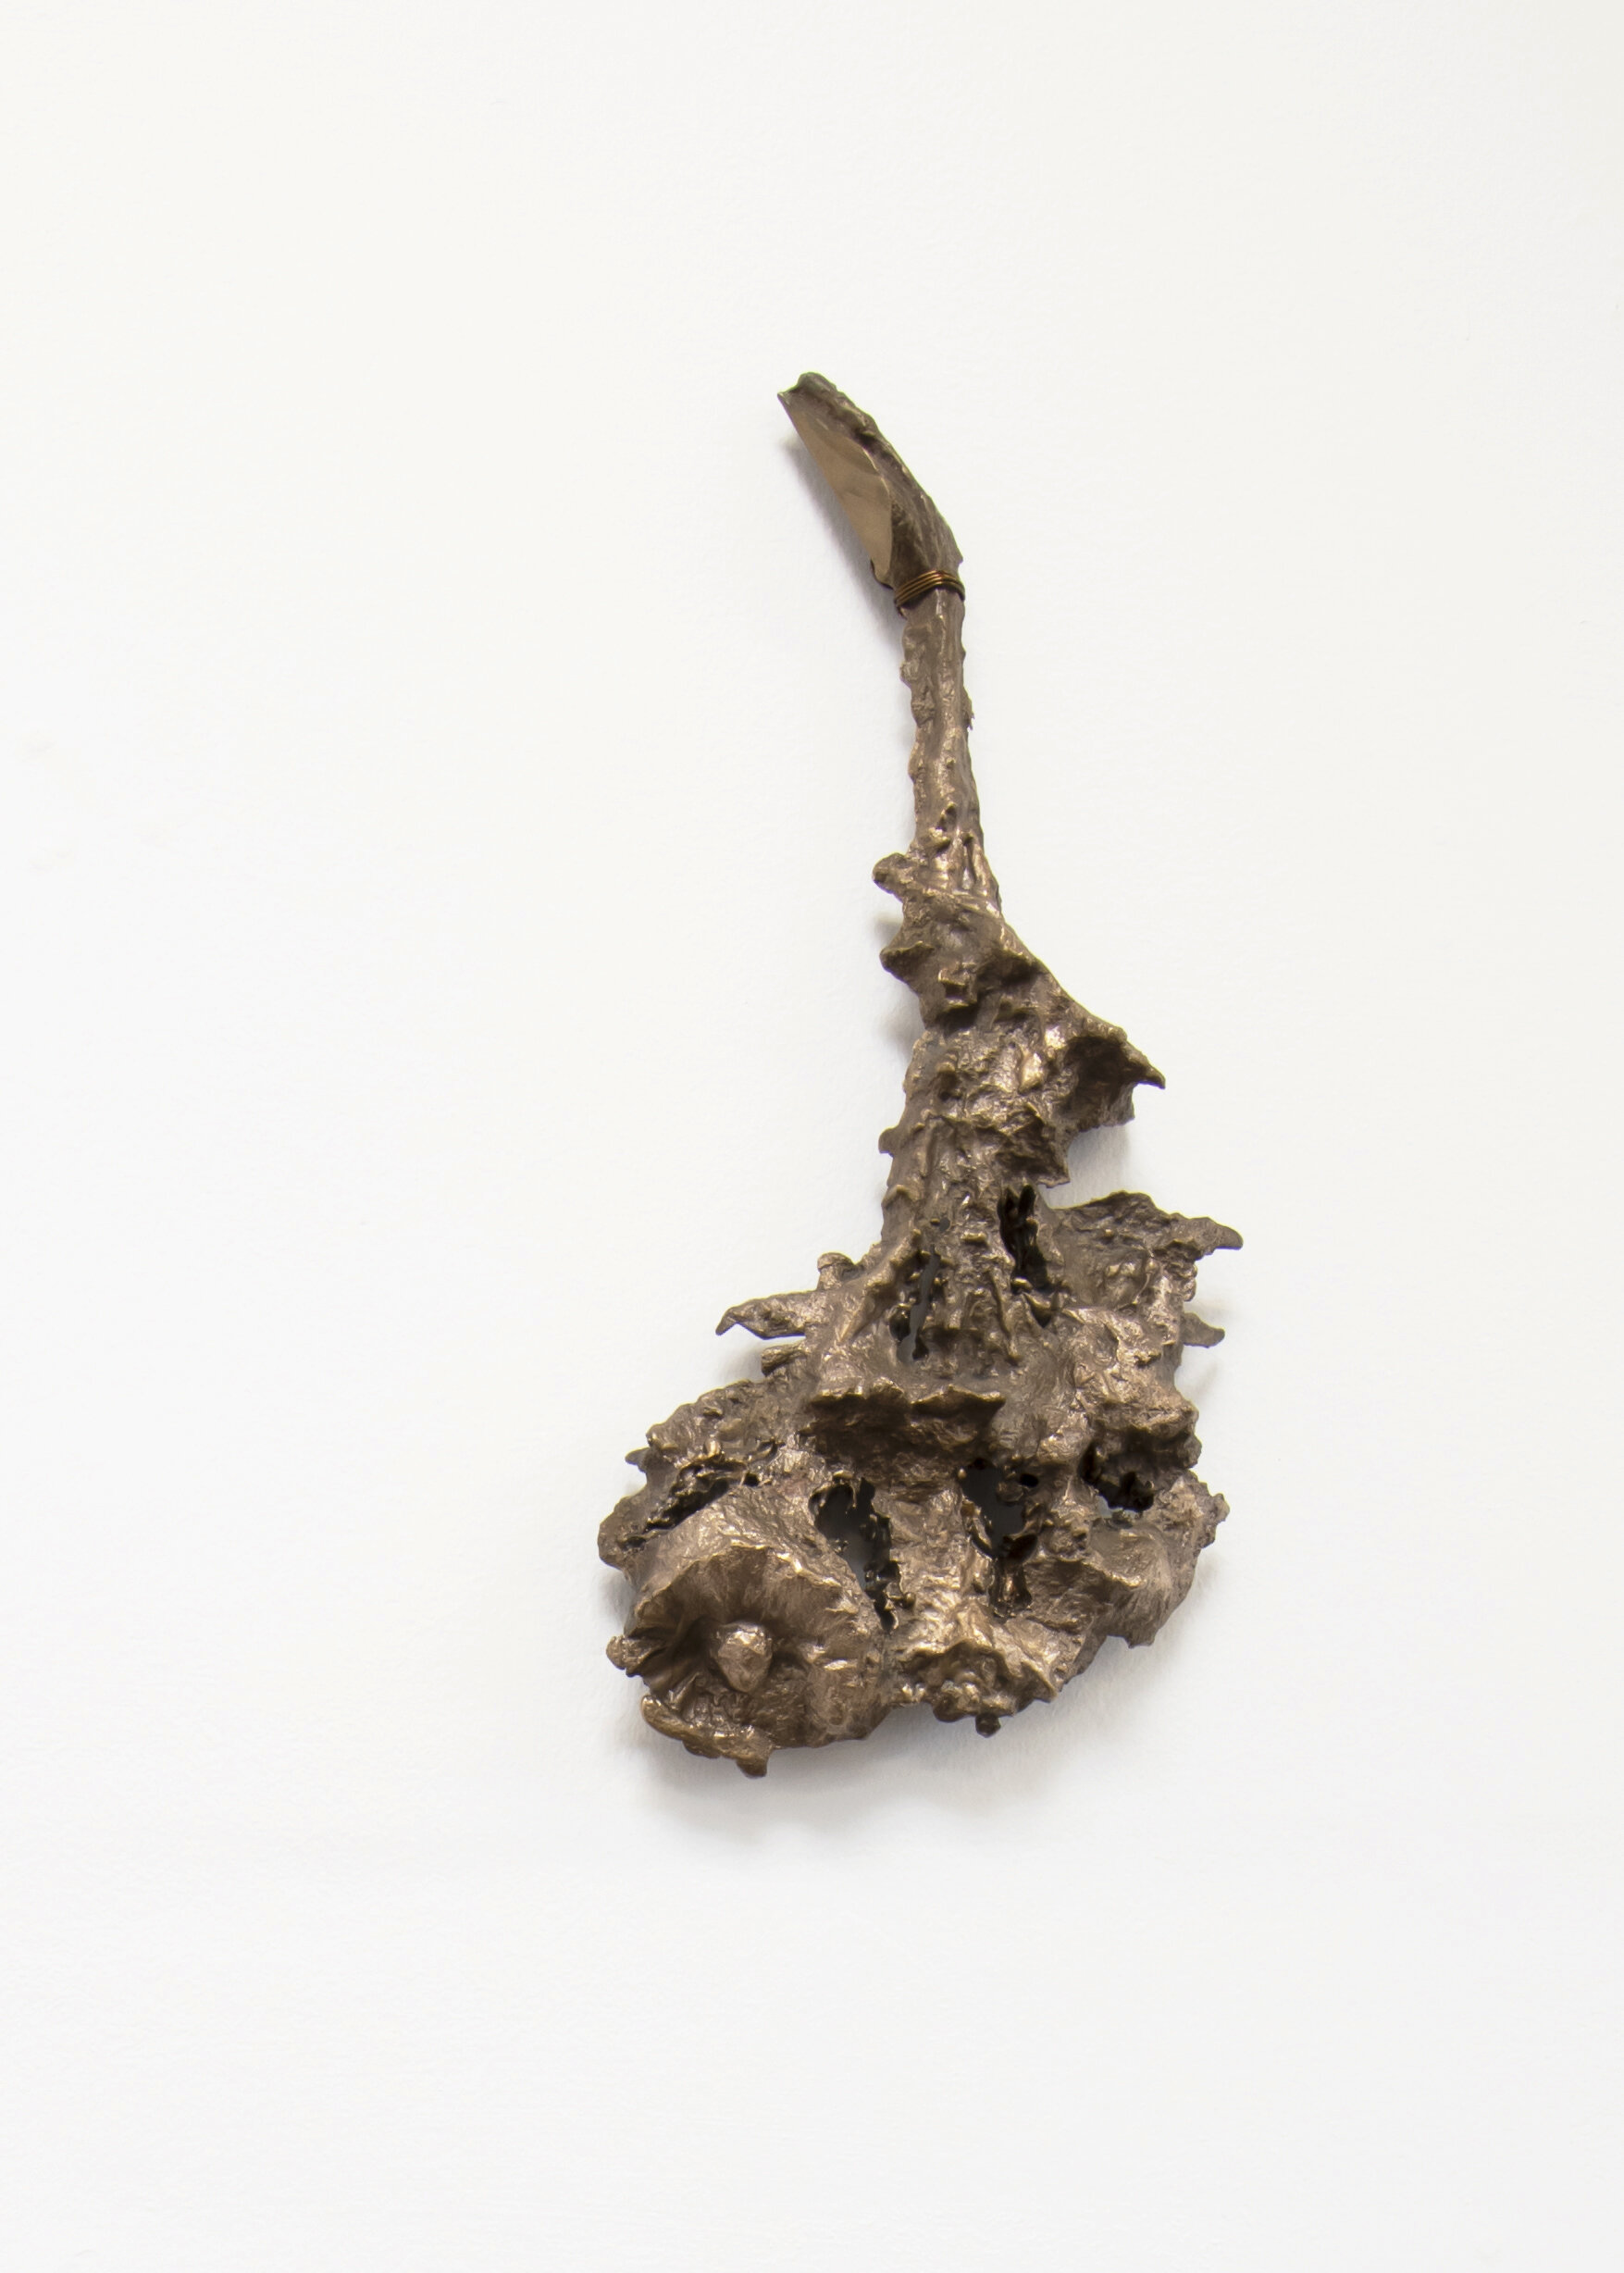  Rebeca Bollinger,  Flowers , 2016. Bronze. 15.75x8x3 inches 